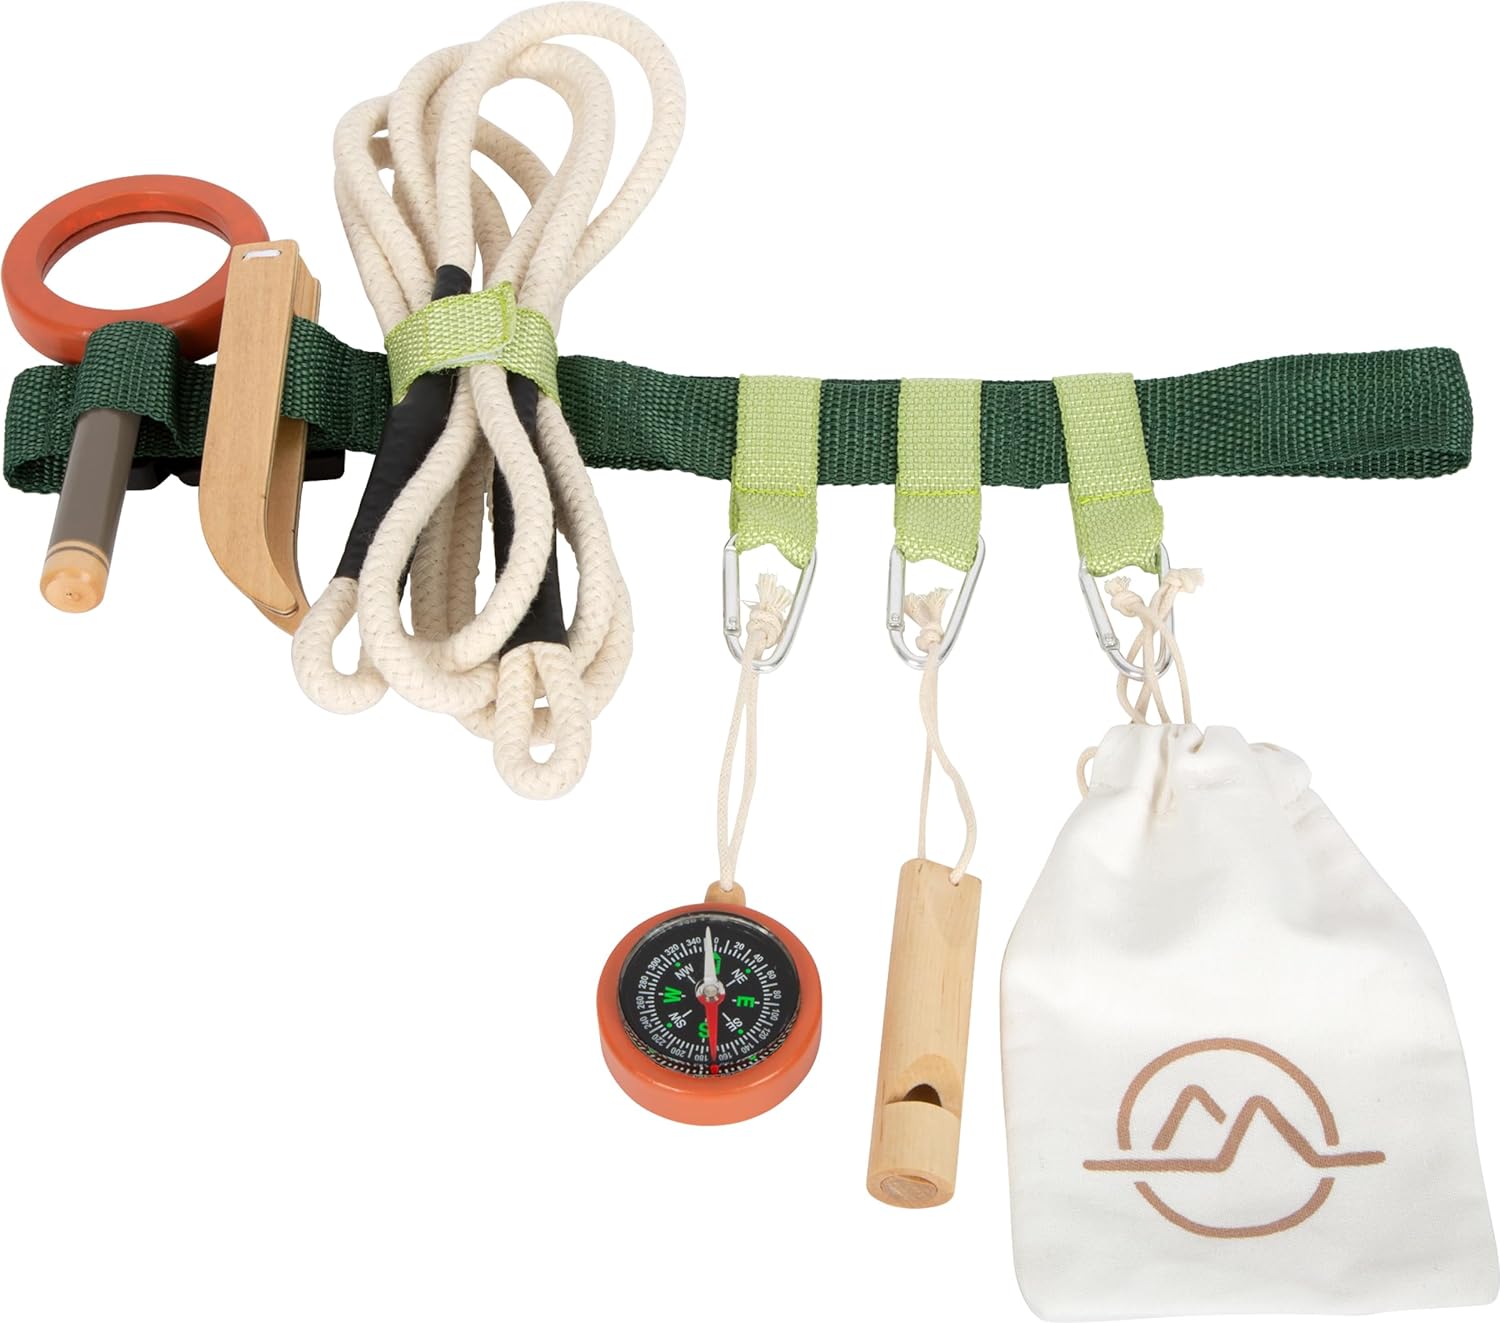 Small Foot: Adventure belt with accessories for play